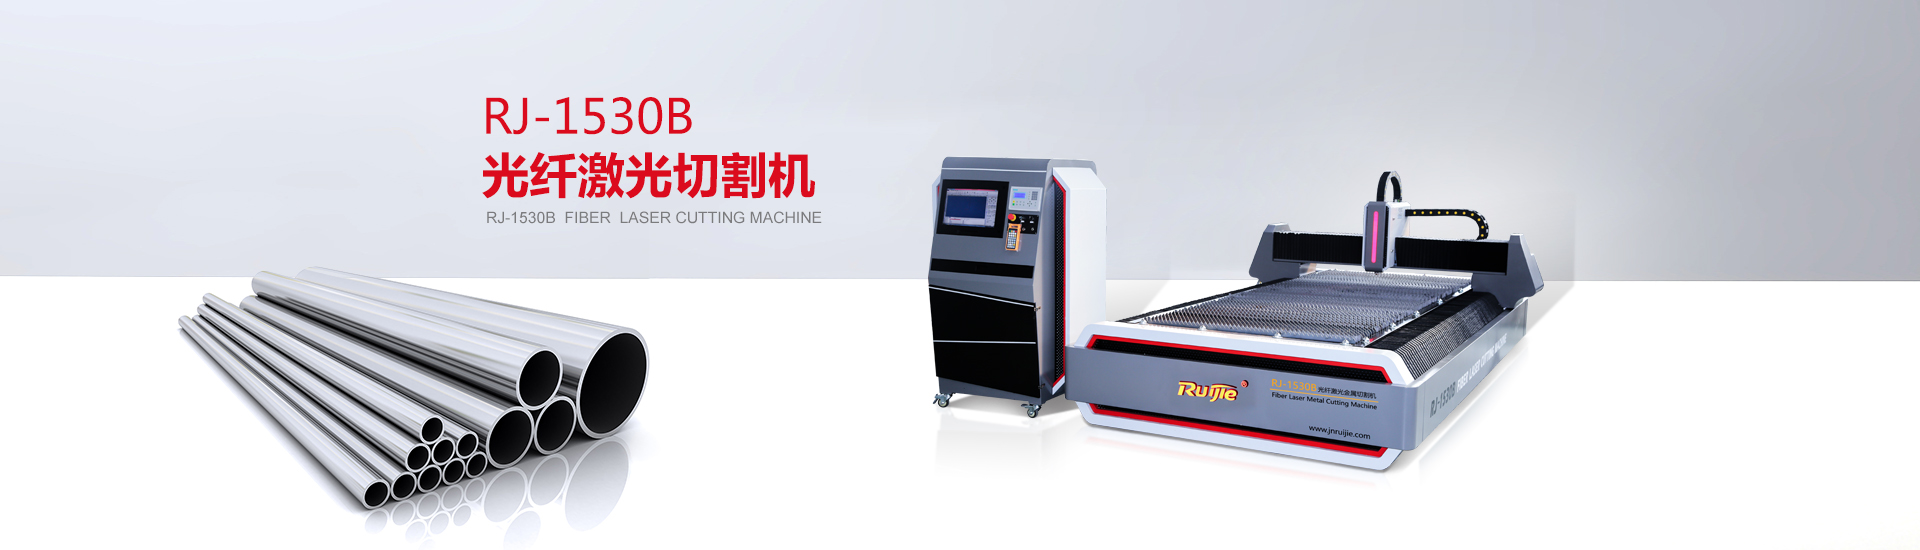 Cyber Monday Laser Cutter & Engraver Deals (2022) Rounded Up by Consumer Articles - EIN Presswire